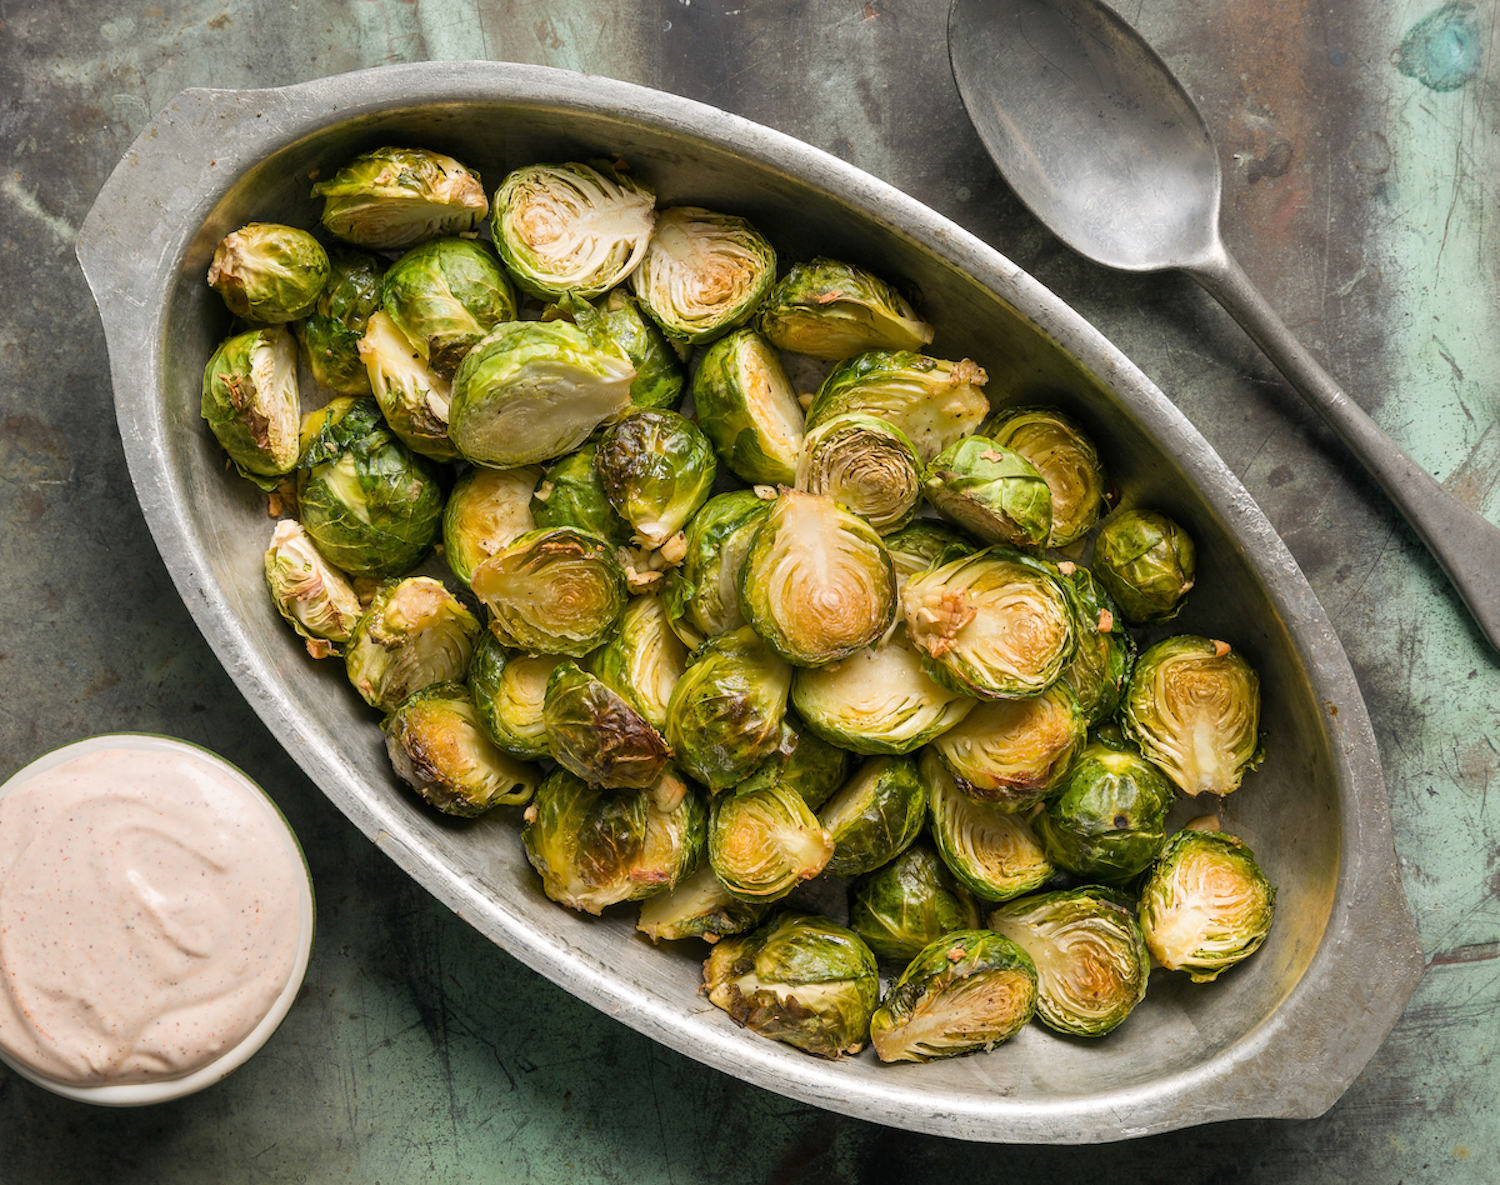 How to serve Brussels sprouts.